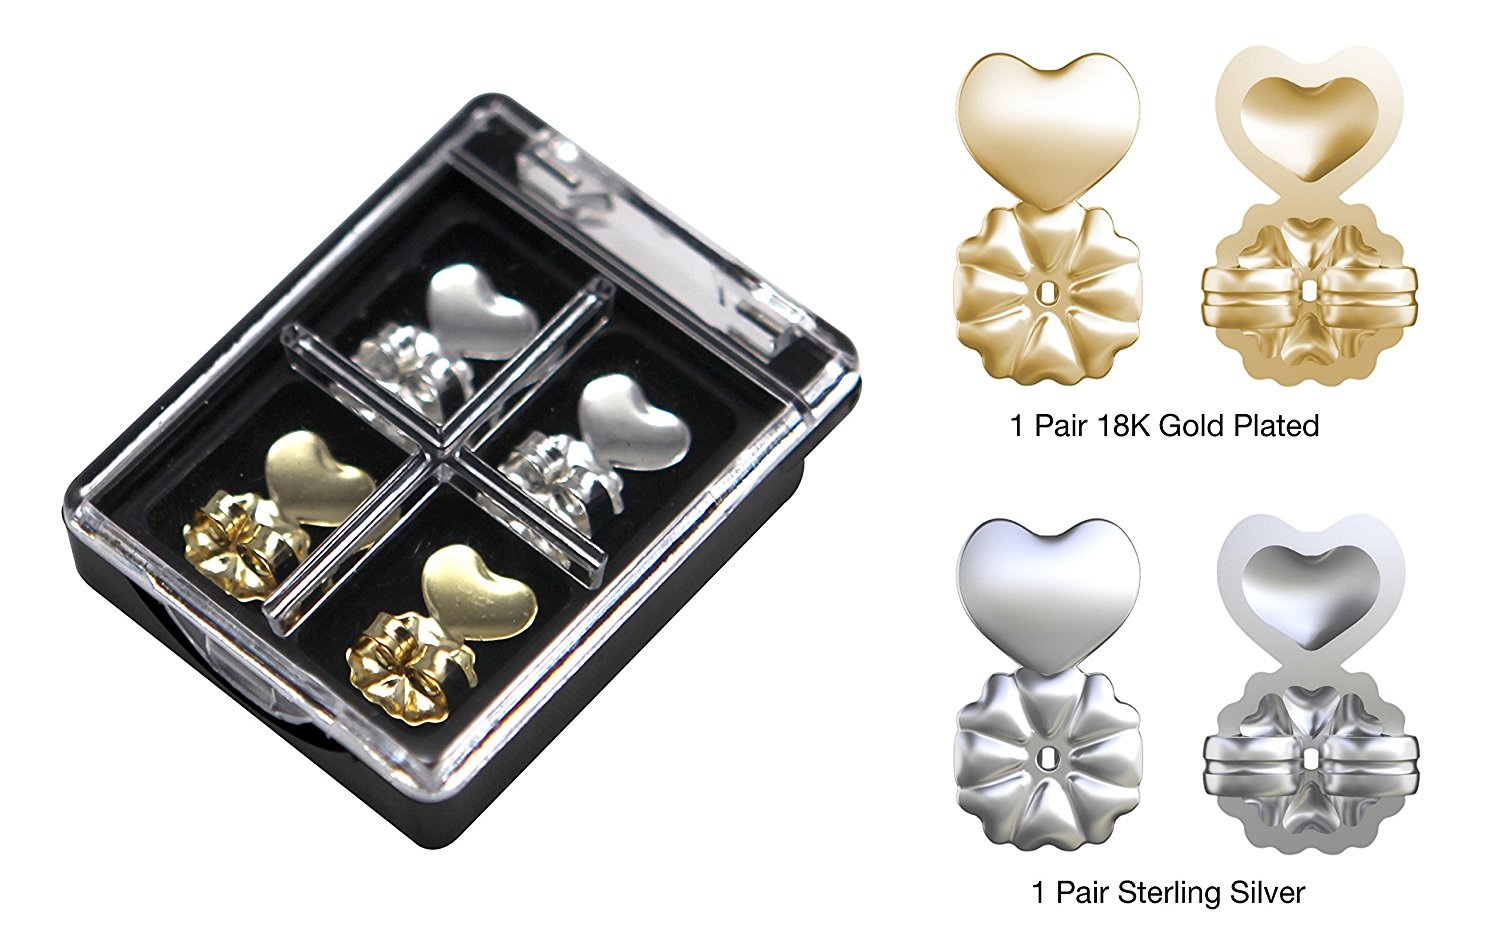 Magic Bax Earring Lifters - 2 Pairs of Adjustable Hypoallergenic